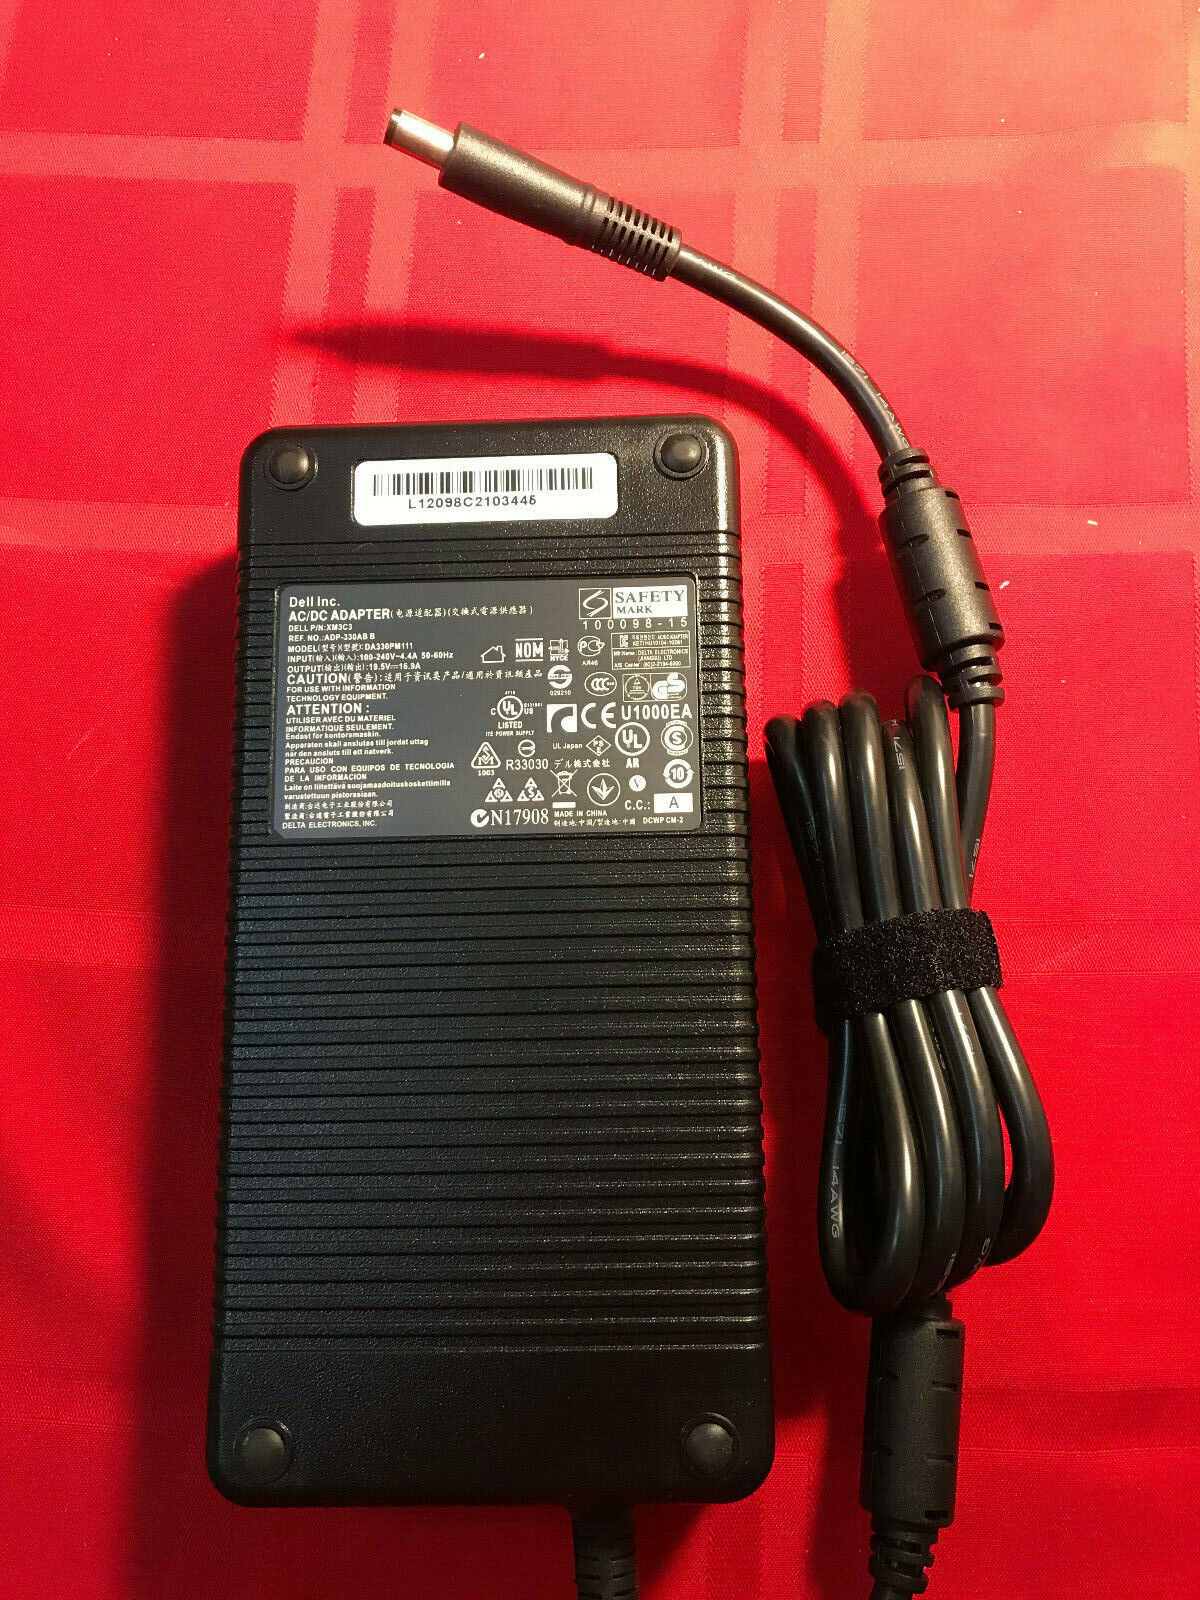 NEW OEM Dell 330W Alienware M18x R1 R2 R3 X51 Power Supply Adapter Charger+Cord